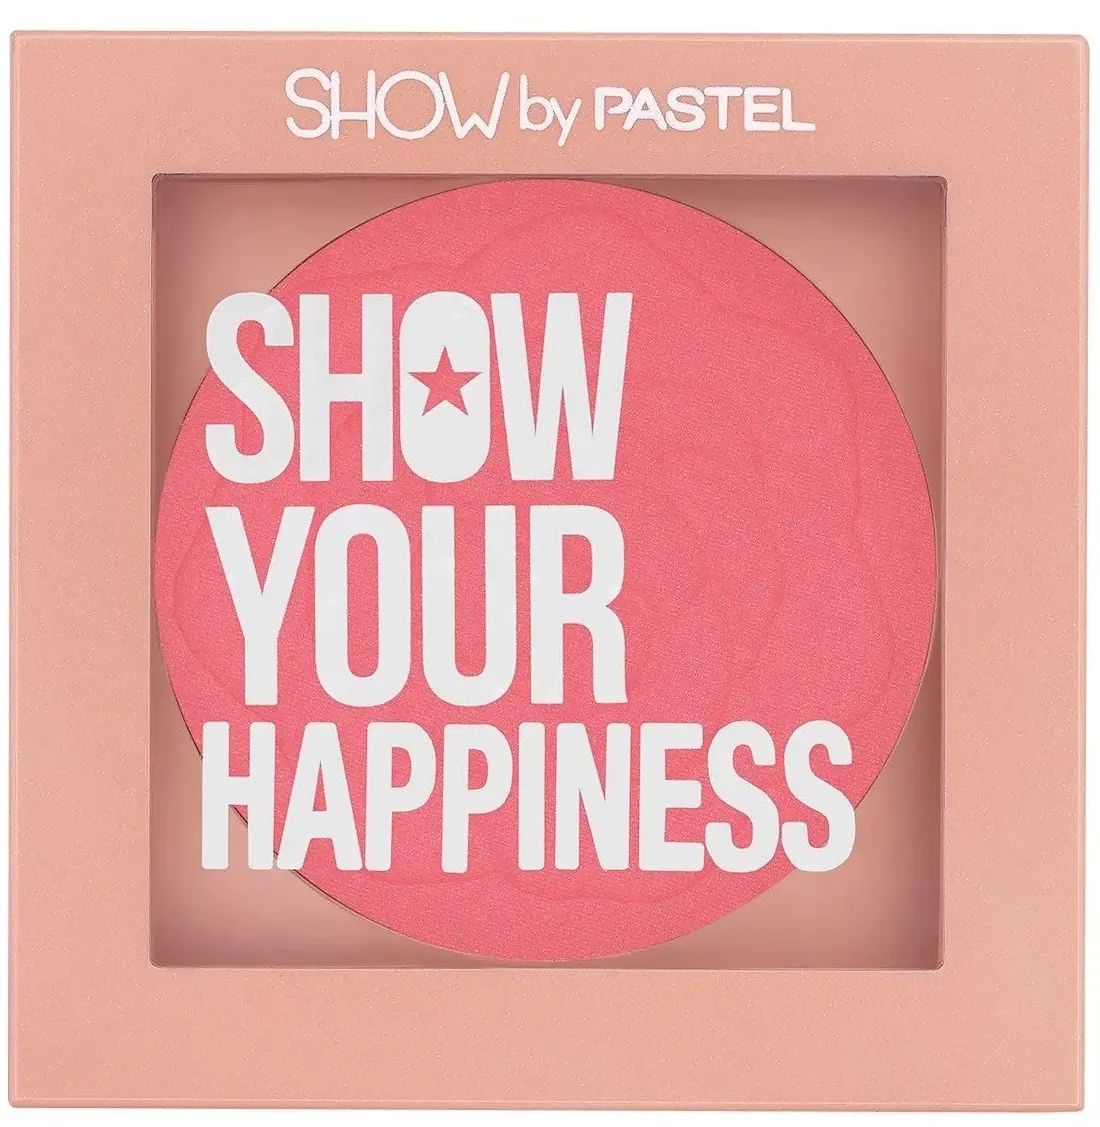 Румяна для лица Pastel Show Your Happiness Blush, 202 Colorful, 4,2 г pastel румяна show your happiness blush